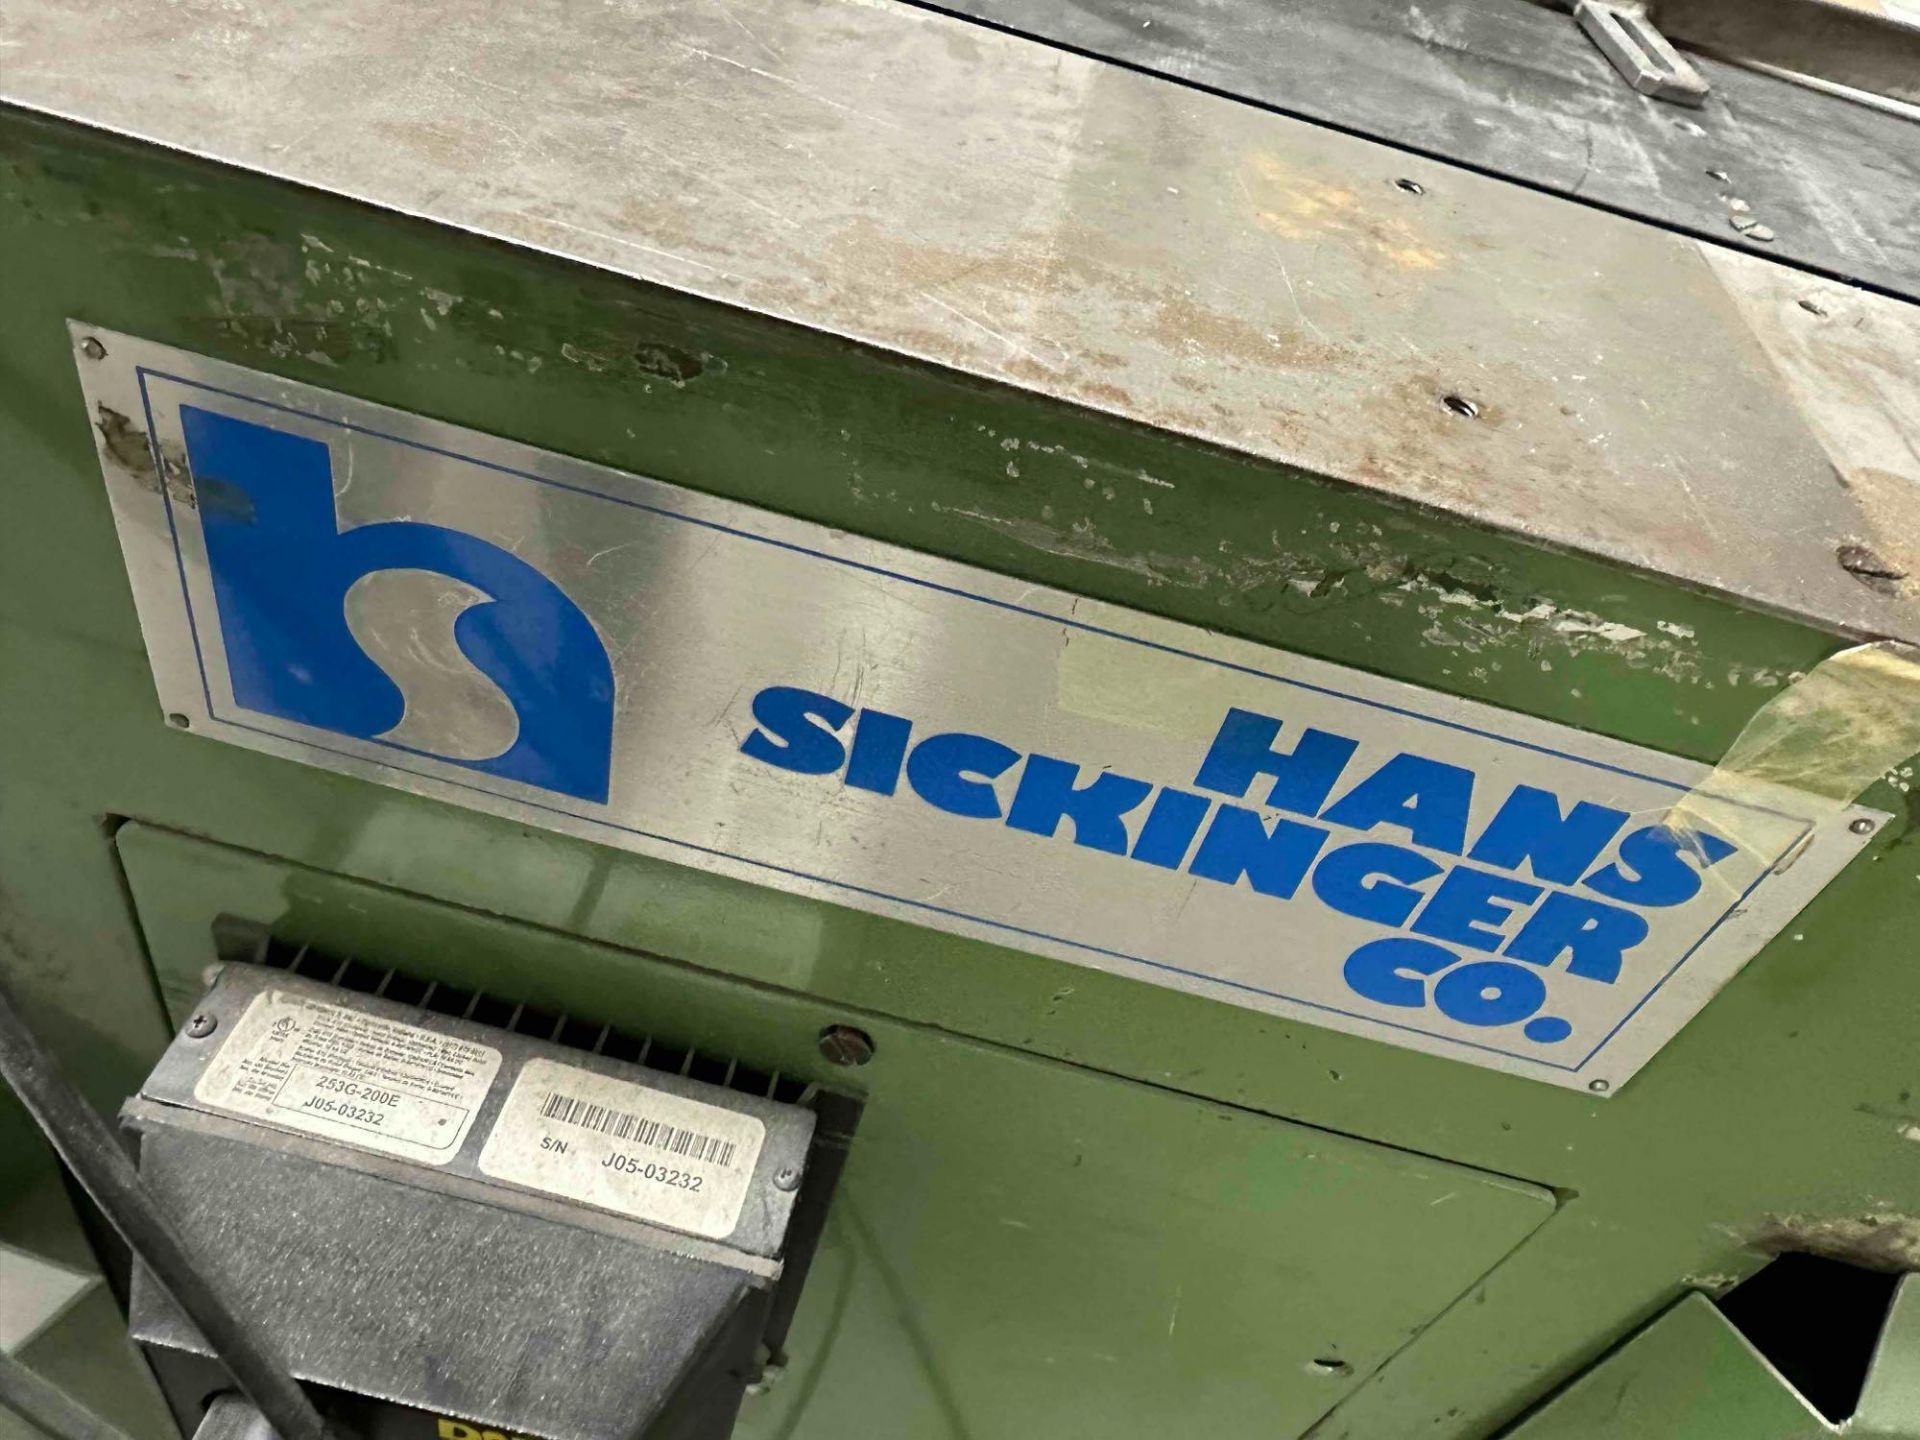 Sickenger model EP1 Automated Binding / Spiral Punch Machine - Image 6 of 7